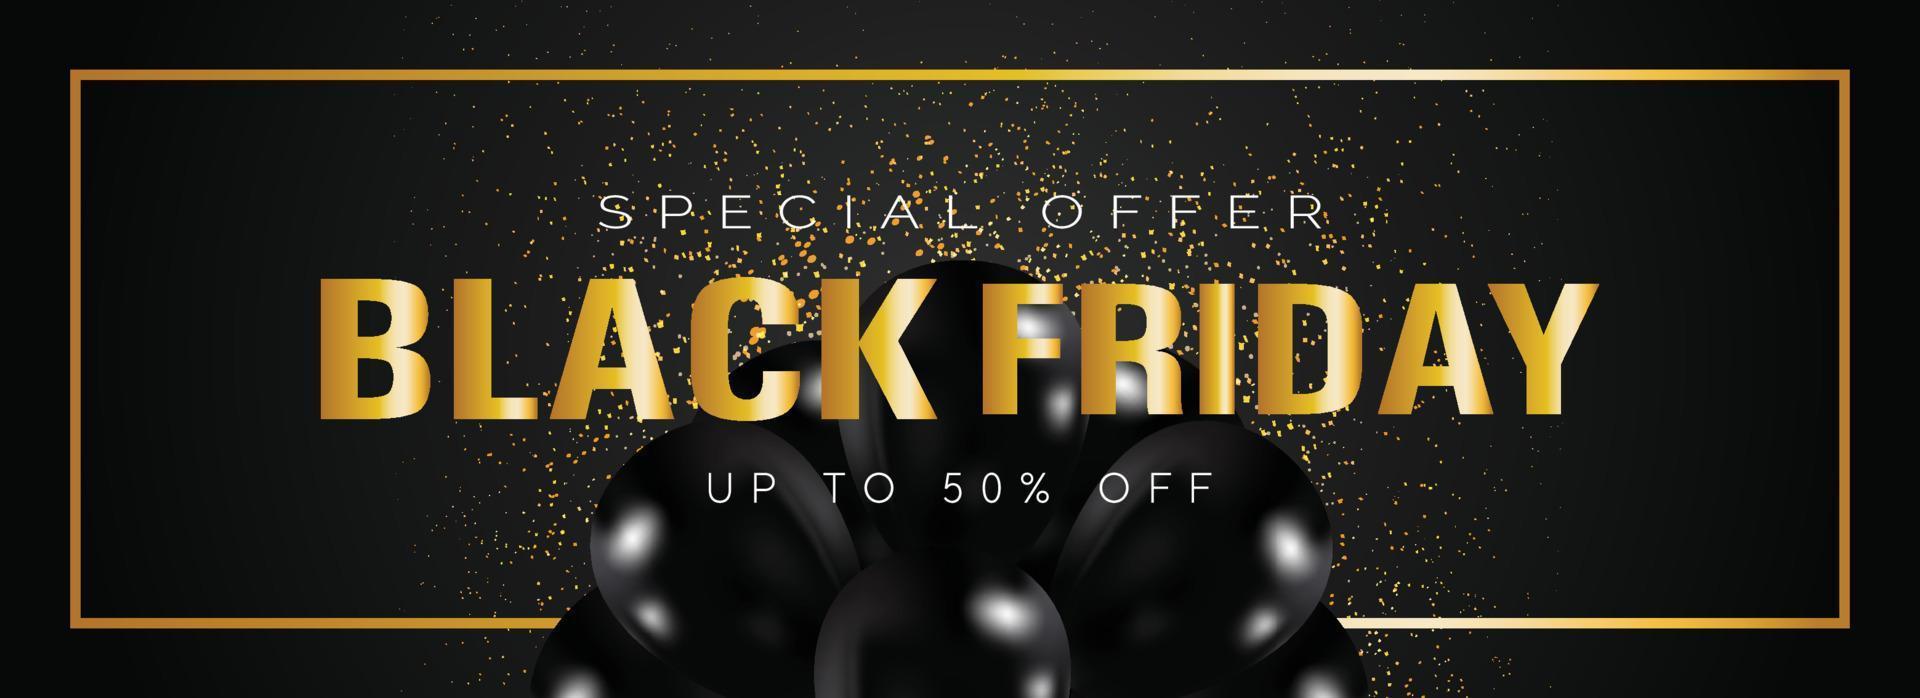 Black Friday Sale Banner with Gold Letters vector